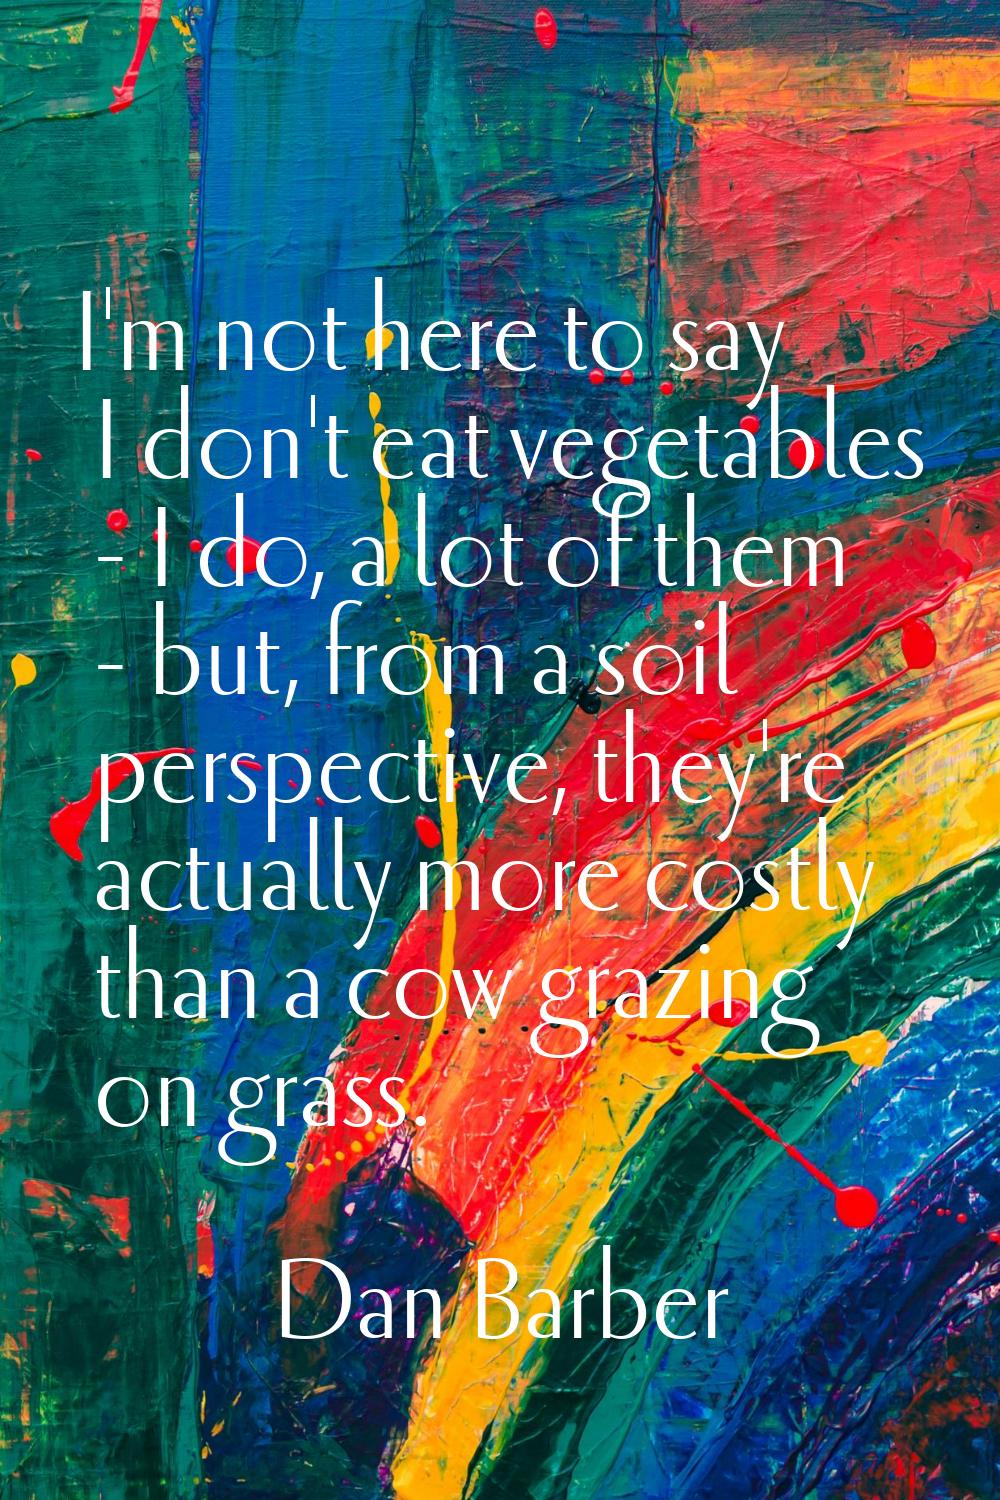 I'm not here to say I don't eat vegetables - I do, a lot of them - but, from a soil perspective, th